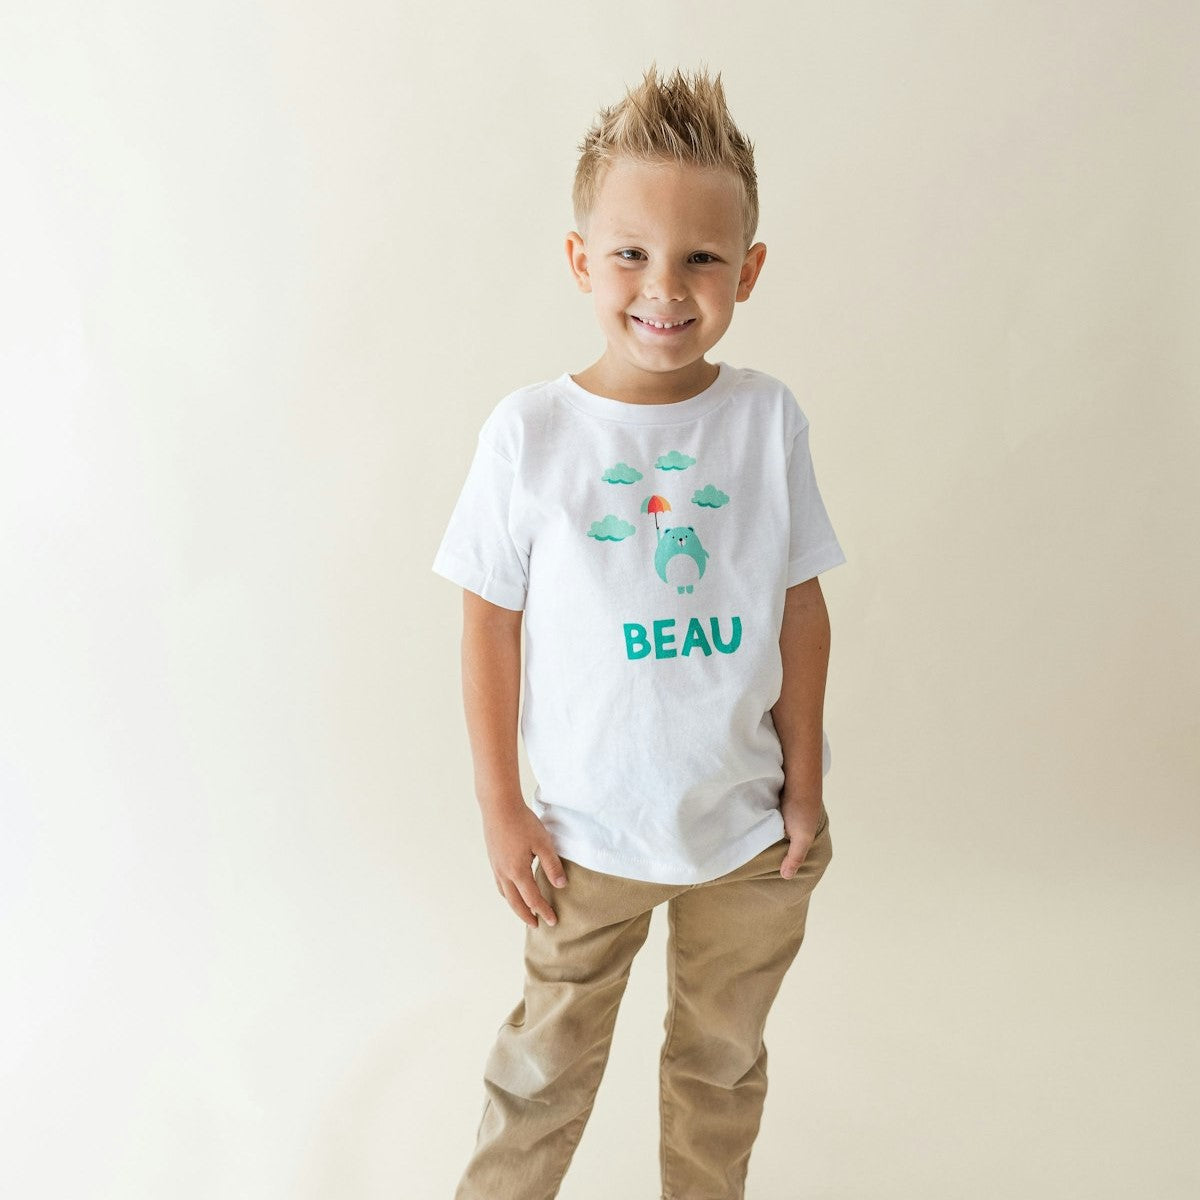 Personalized boy's shirt with cute bear and clouds design